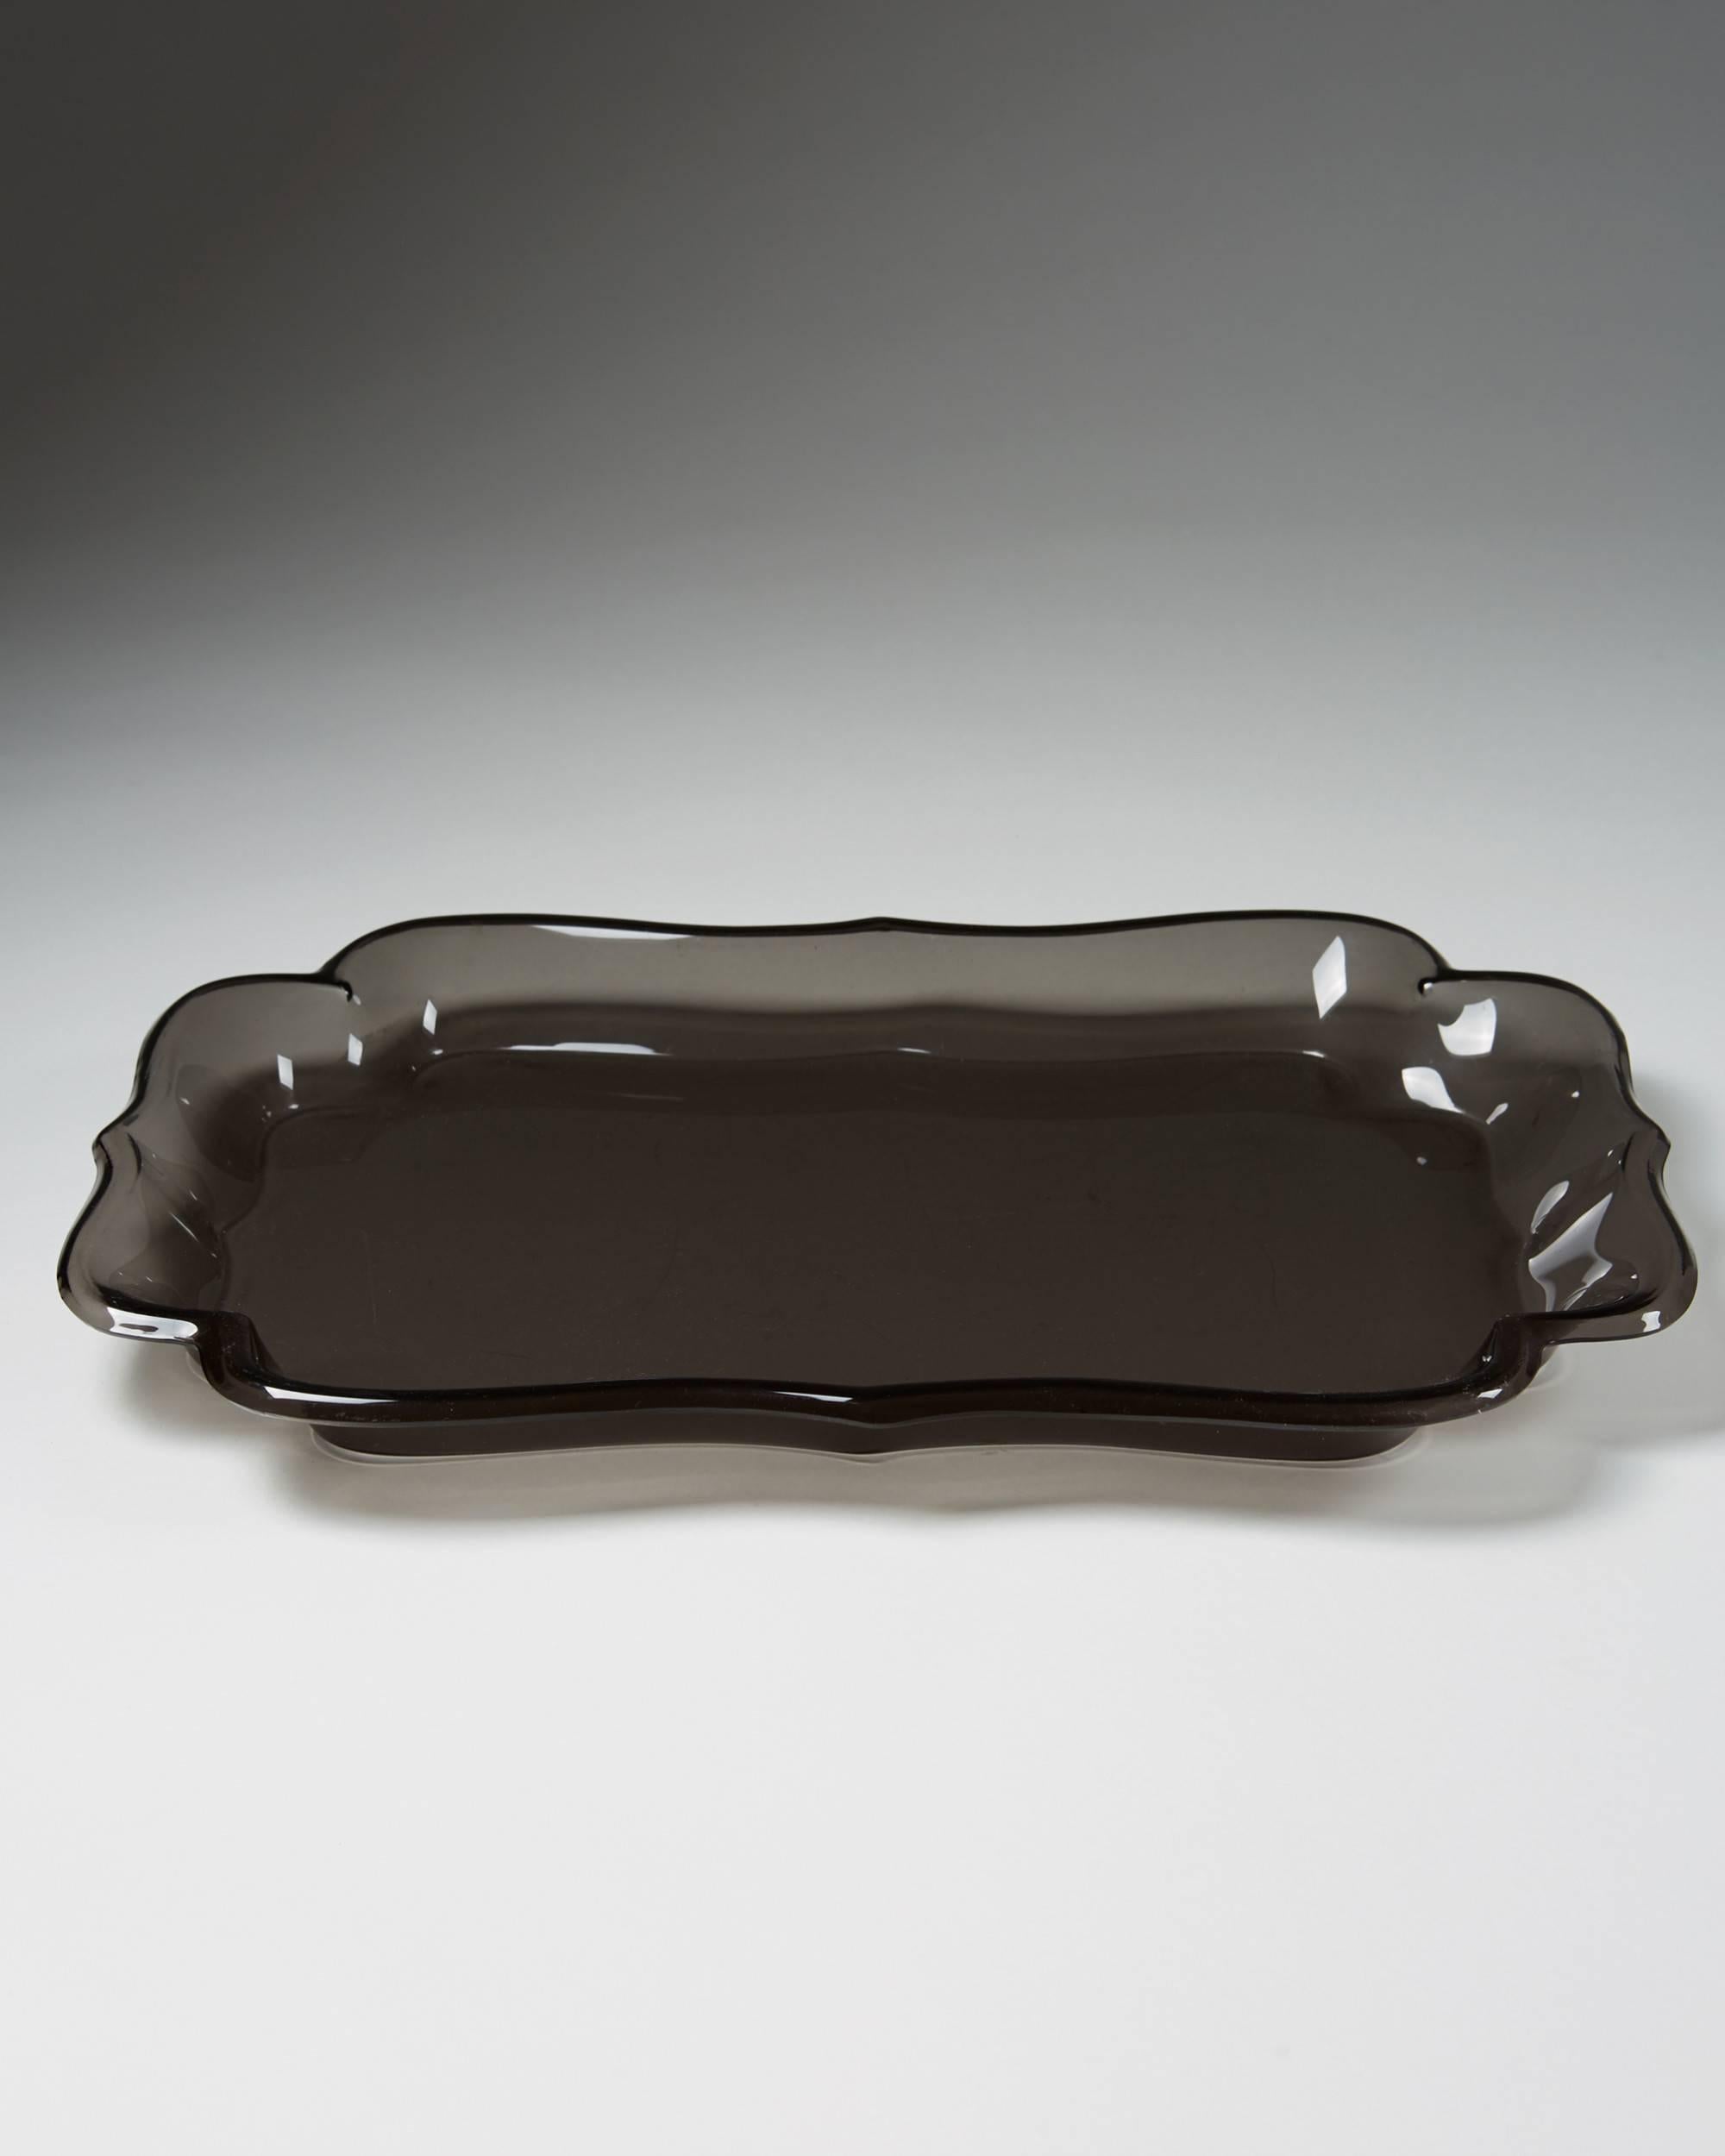 Tray anonymous,
Italy, 1980s.

Plexi glass.

Sold by Svenskt Tenn.

Measures: L 52 cm/ 20 1/2